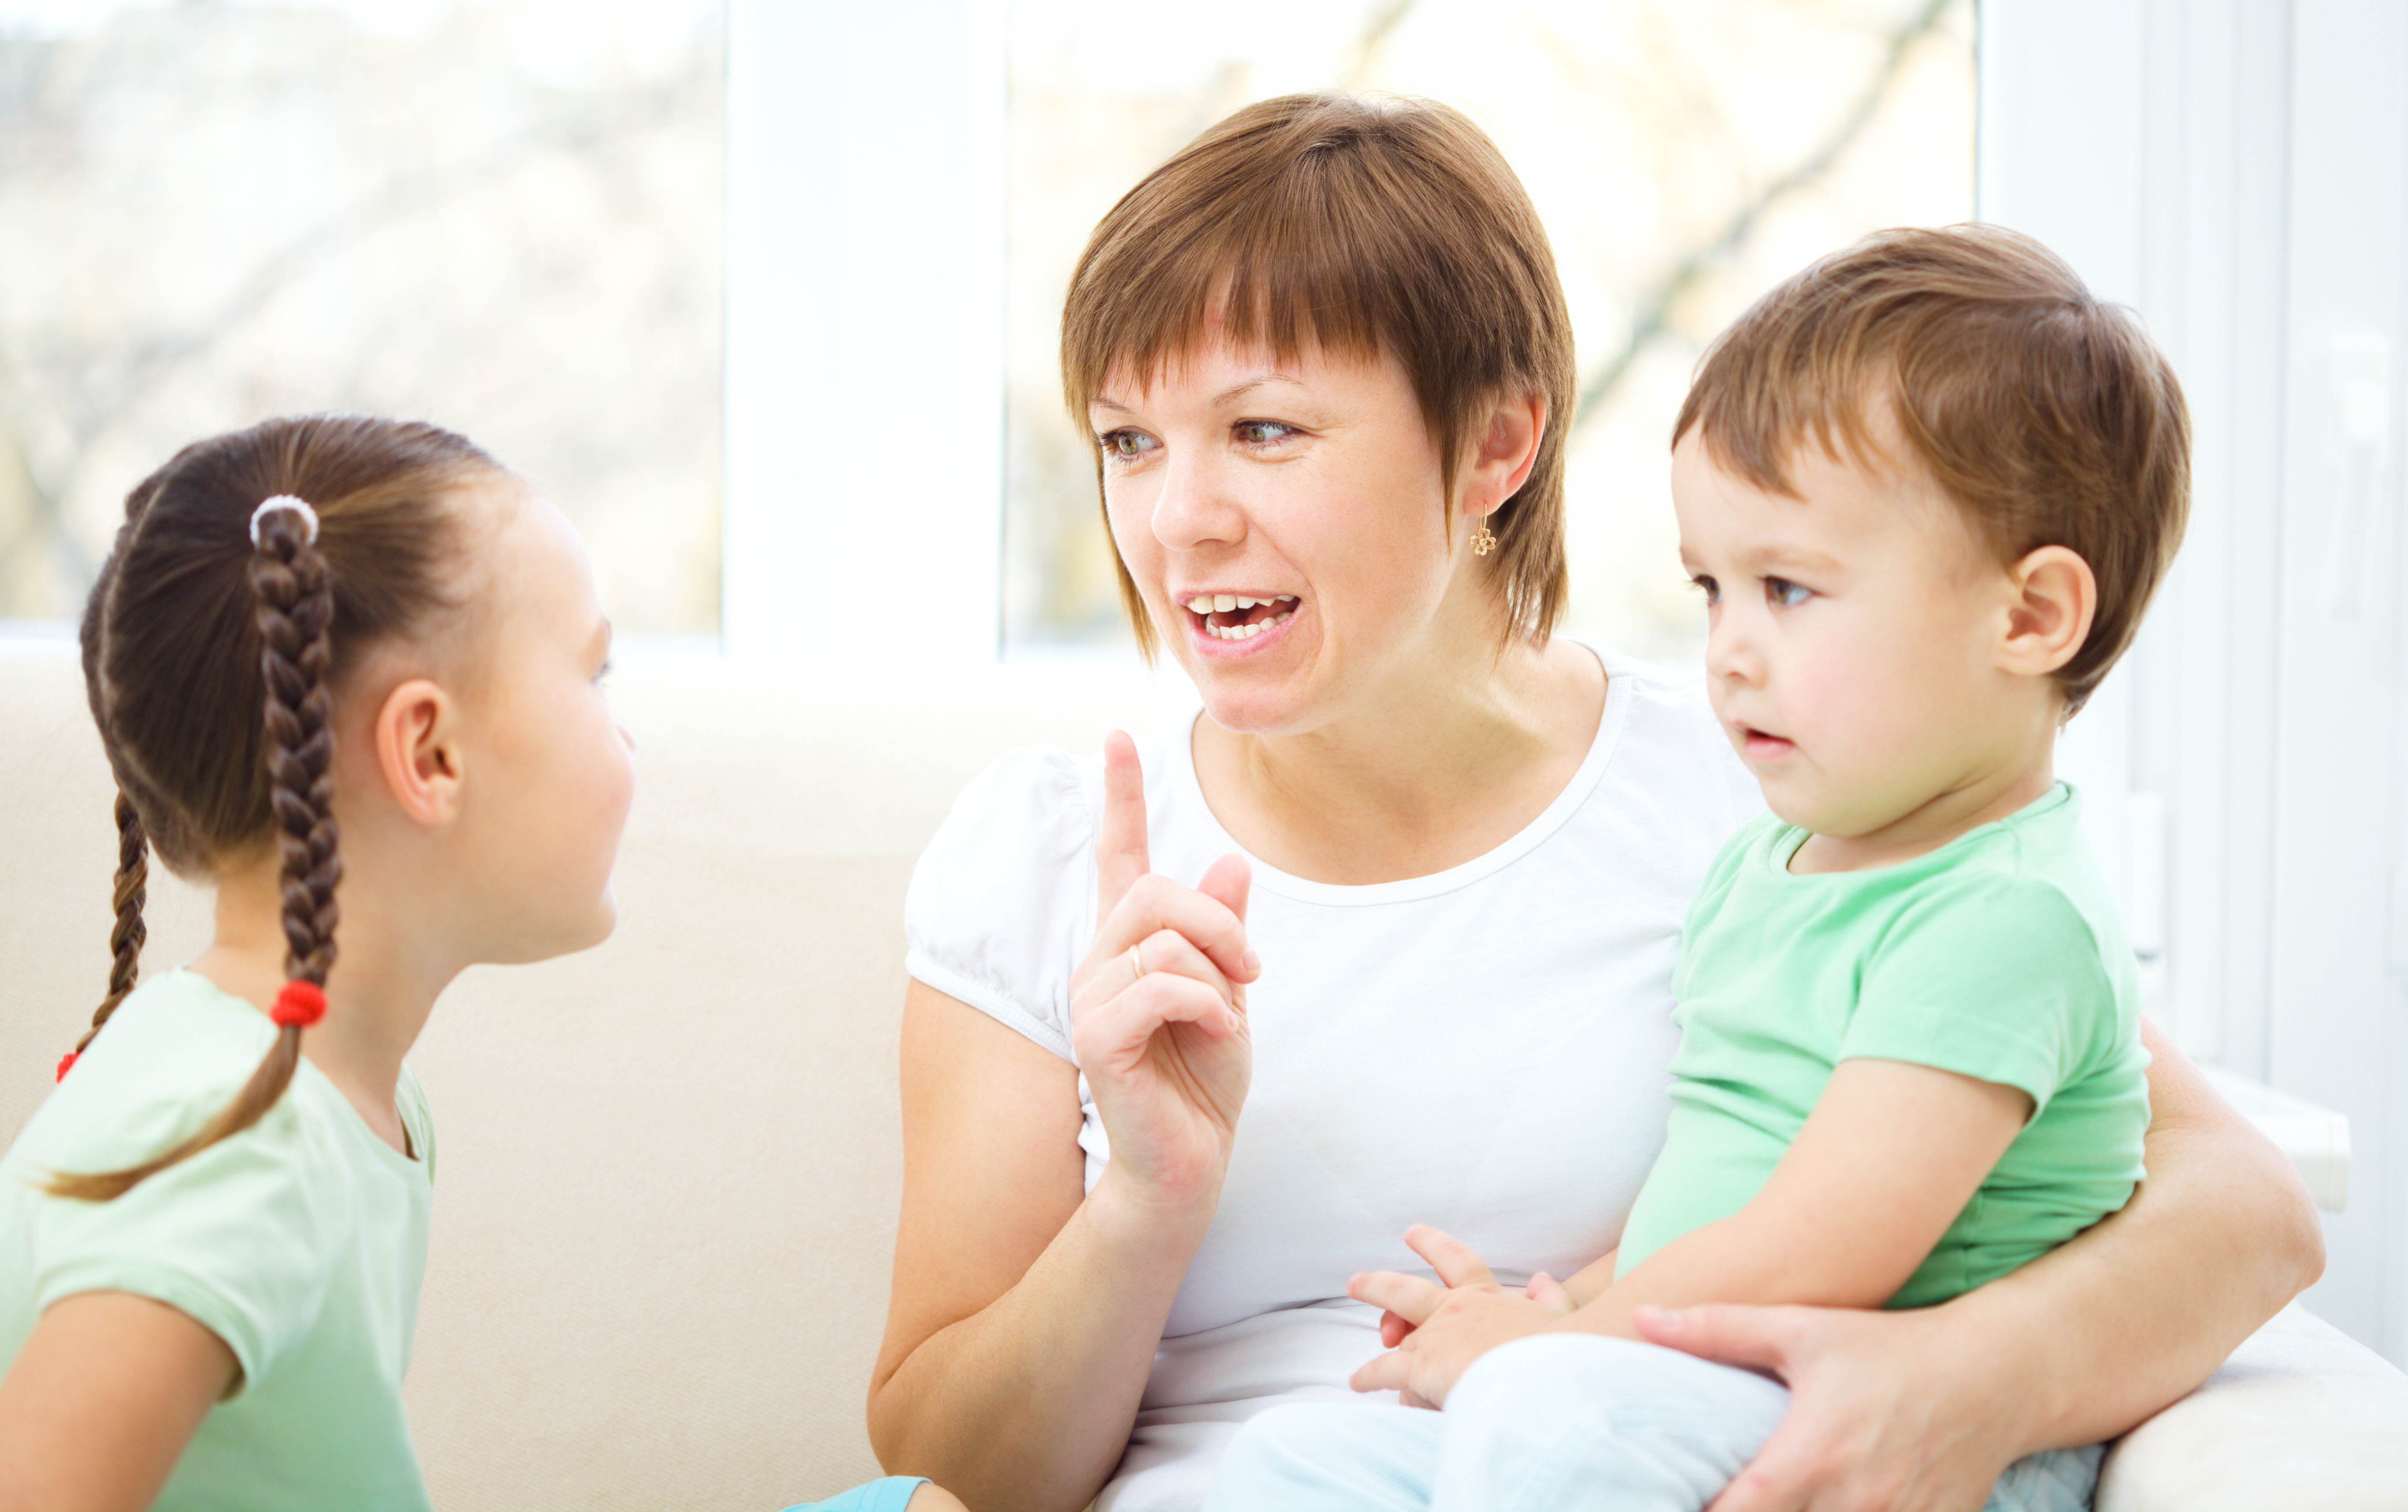 4 Things You Should Never Tell Your Kids